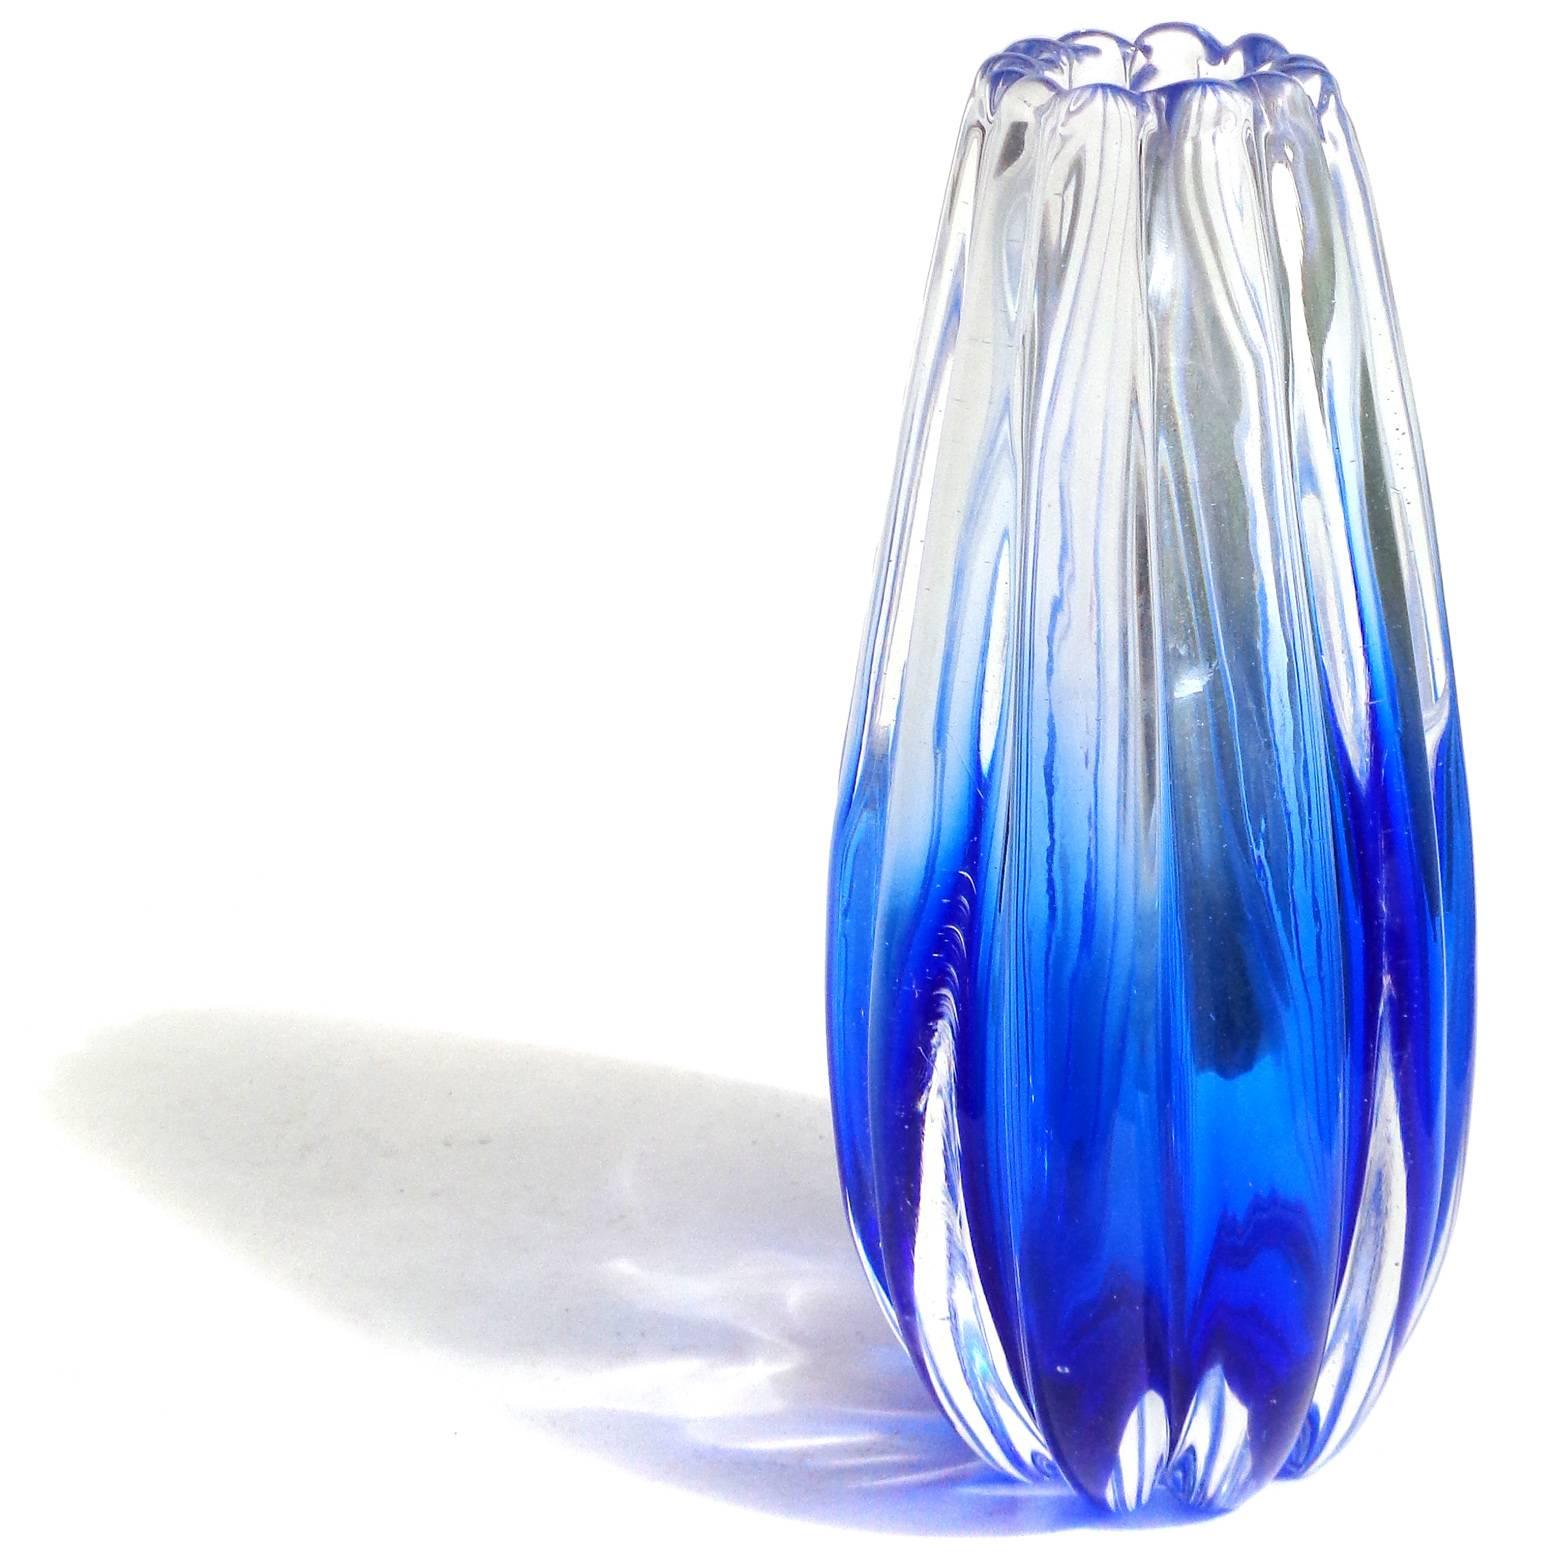 Free shipping worldwide! See details below description.

Beautiful Murano handblown Sommerso cobalt blue, ribbed art glass flower vase. Documented to designer Flavio Poli for Seguso Vetri D' Arte, number 12024, circa 1958. The piece has two